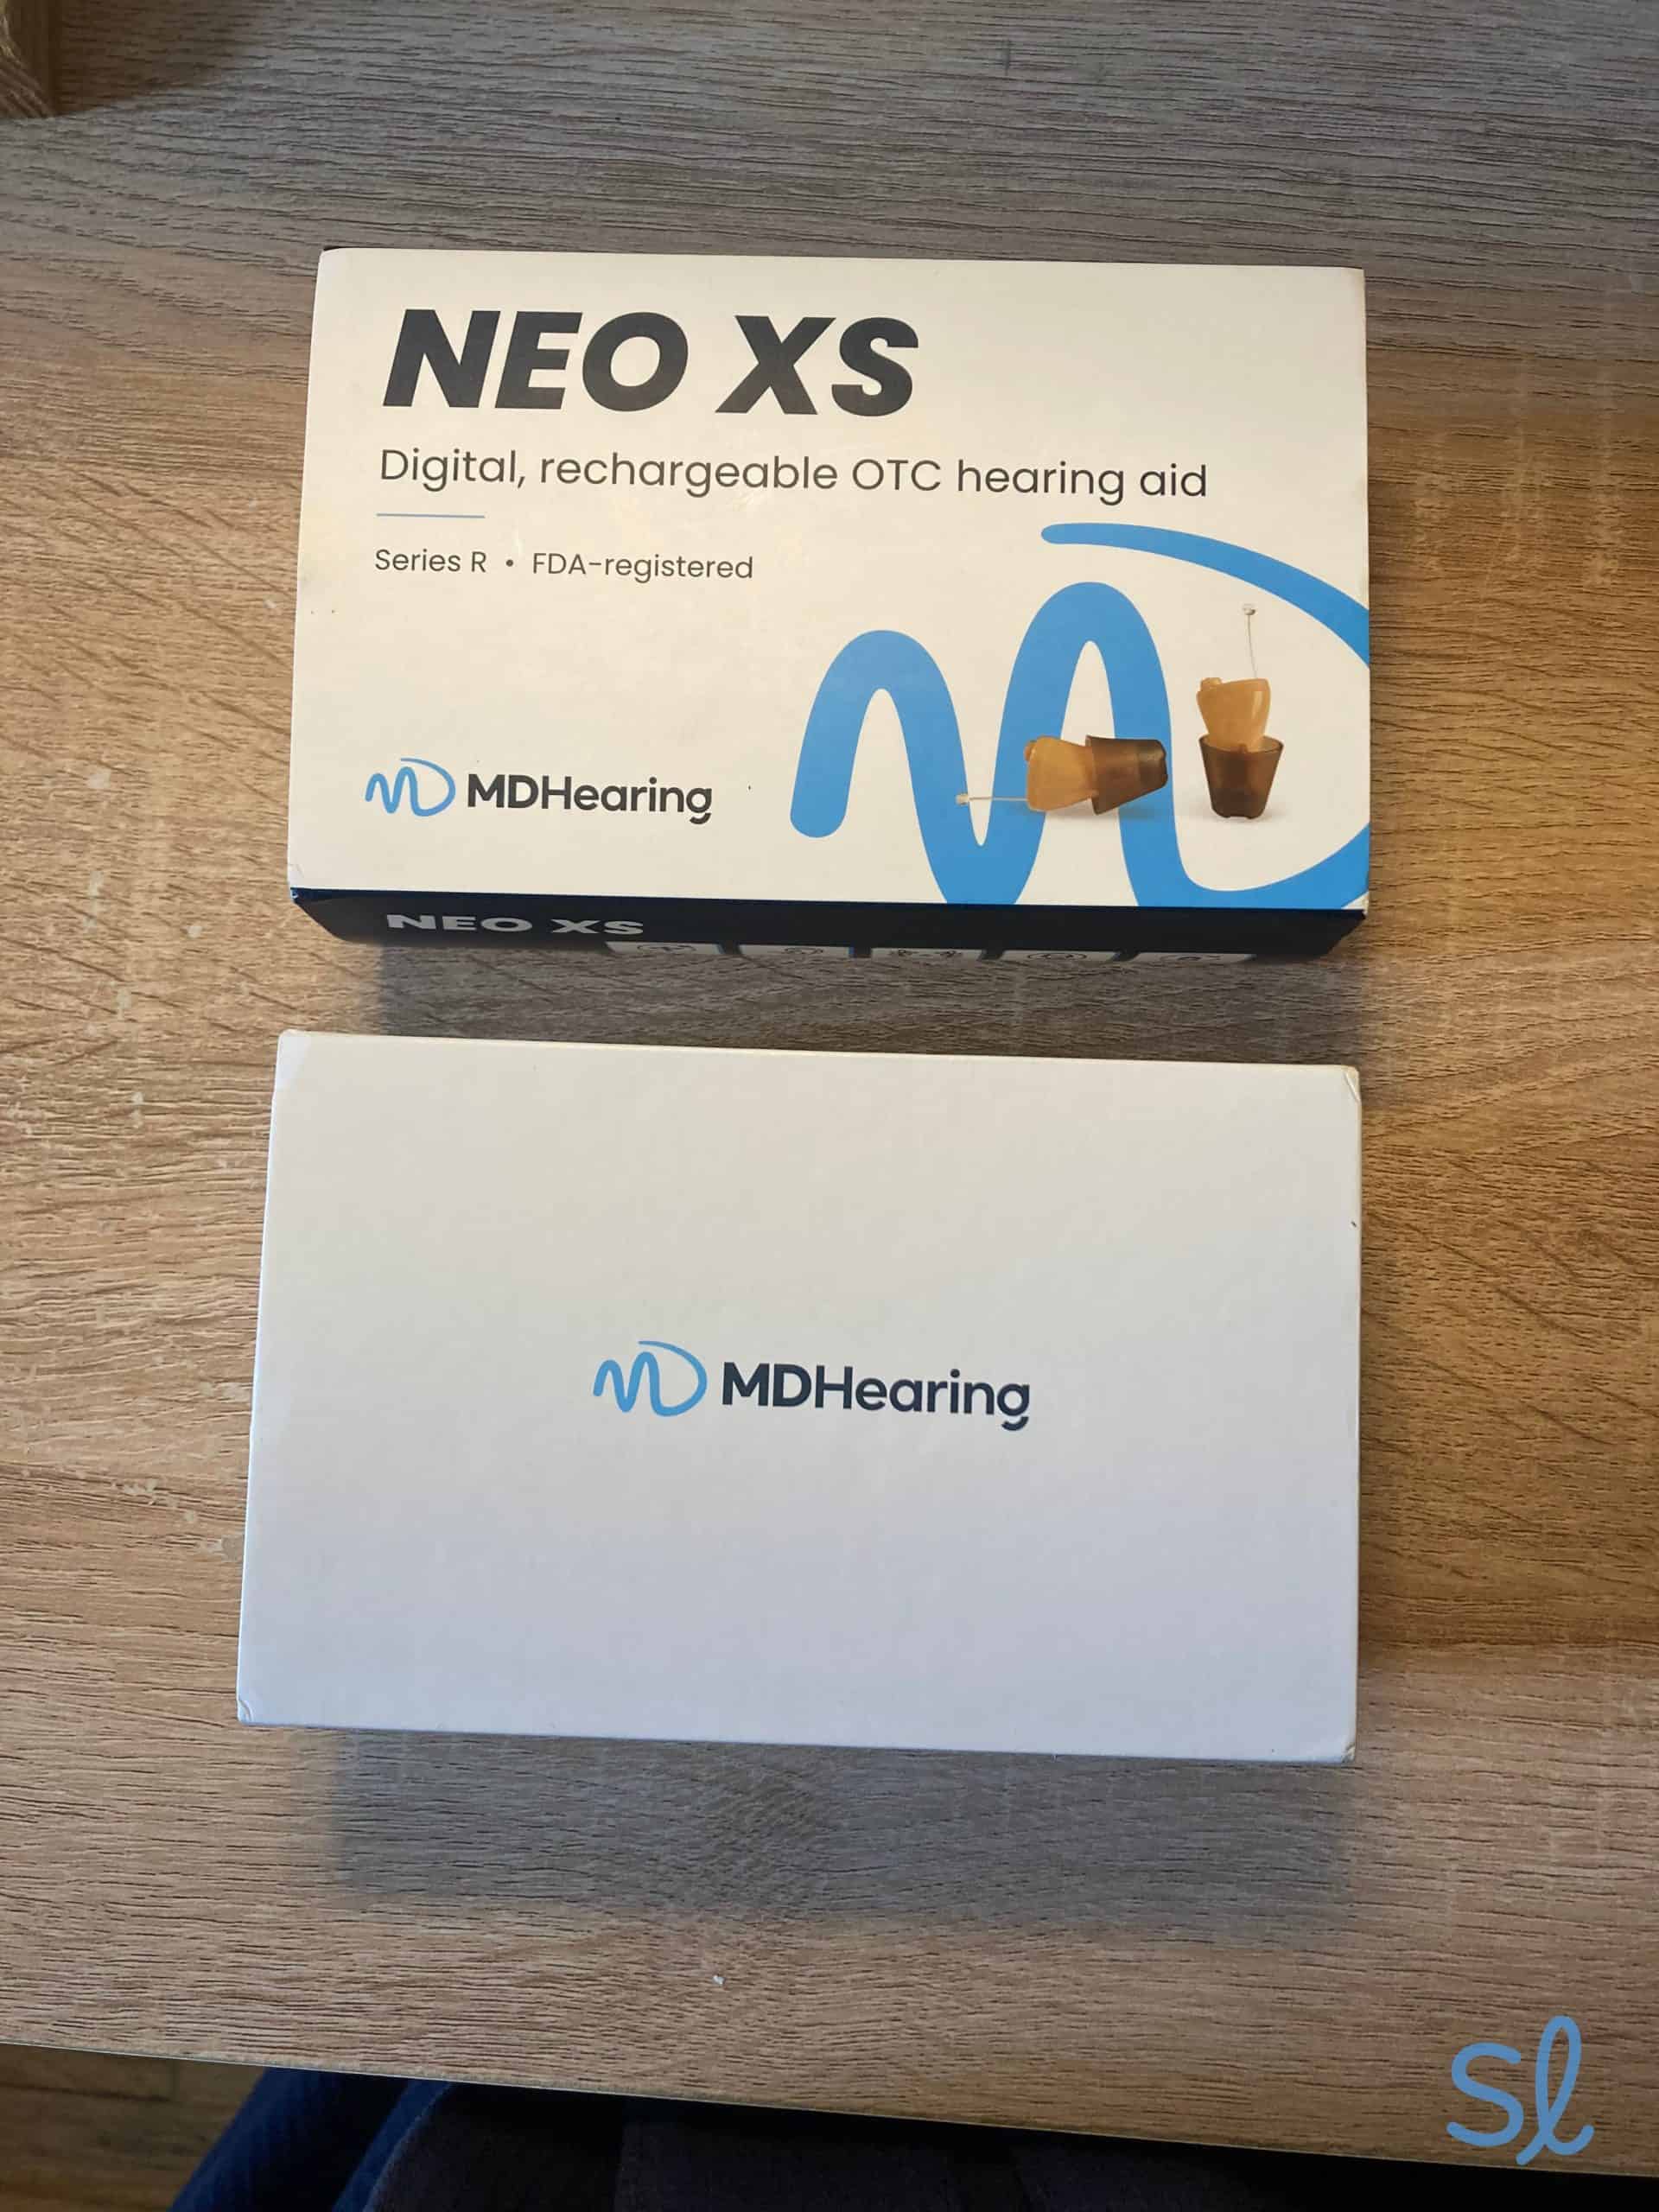 The NEO XS packaging from MDHearing